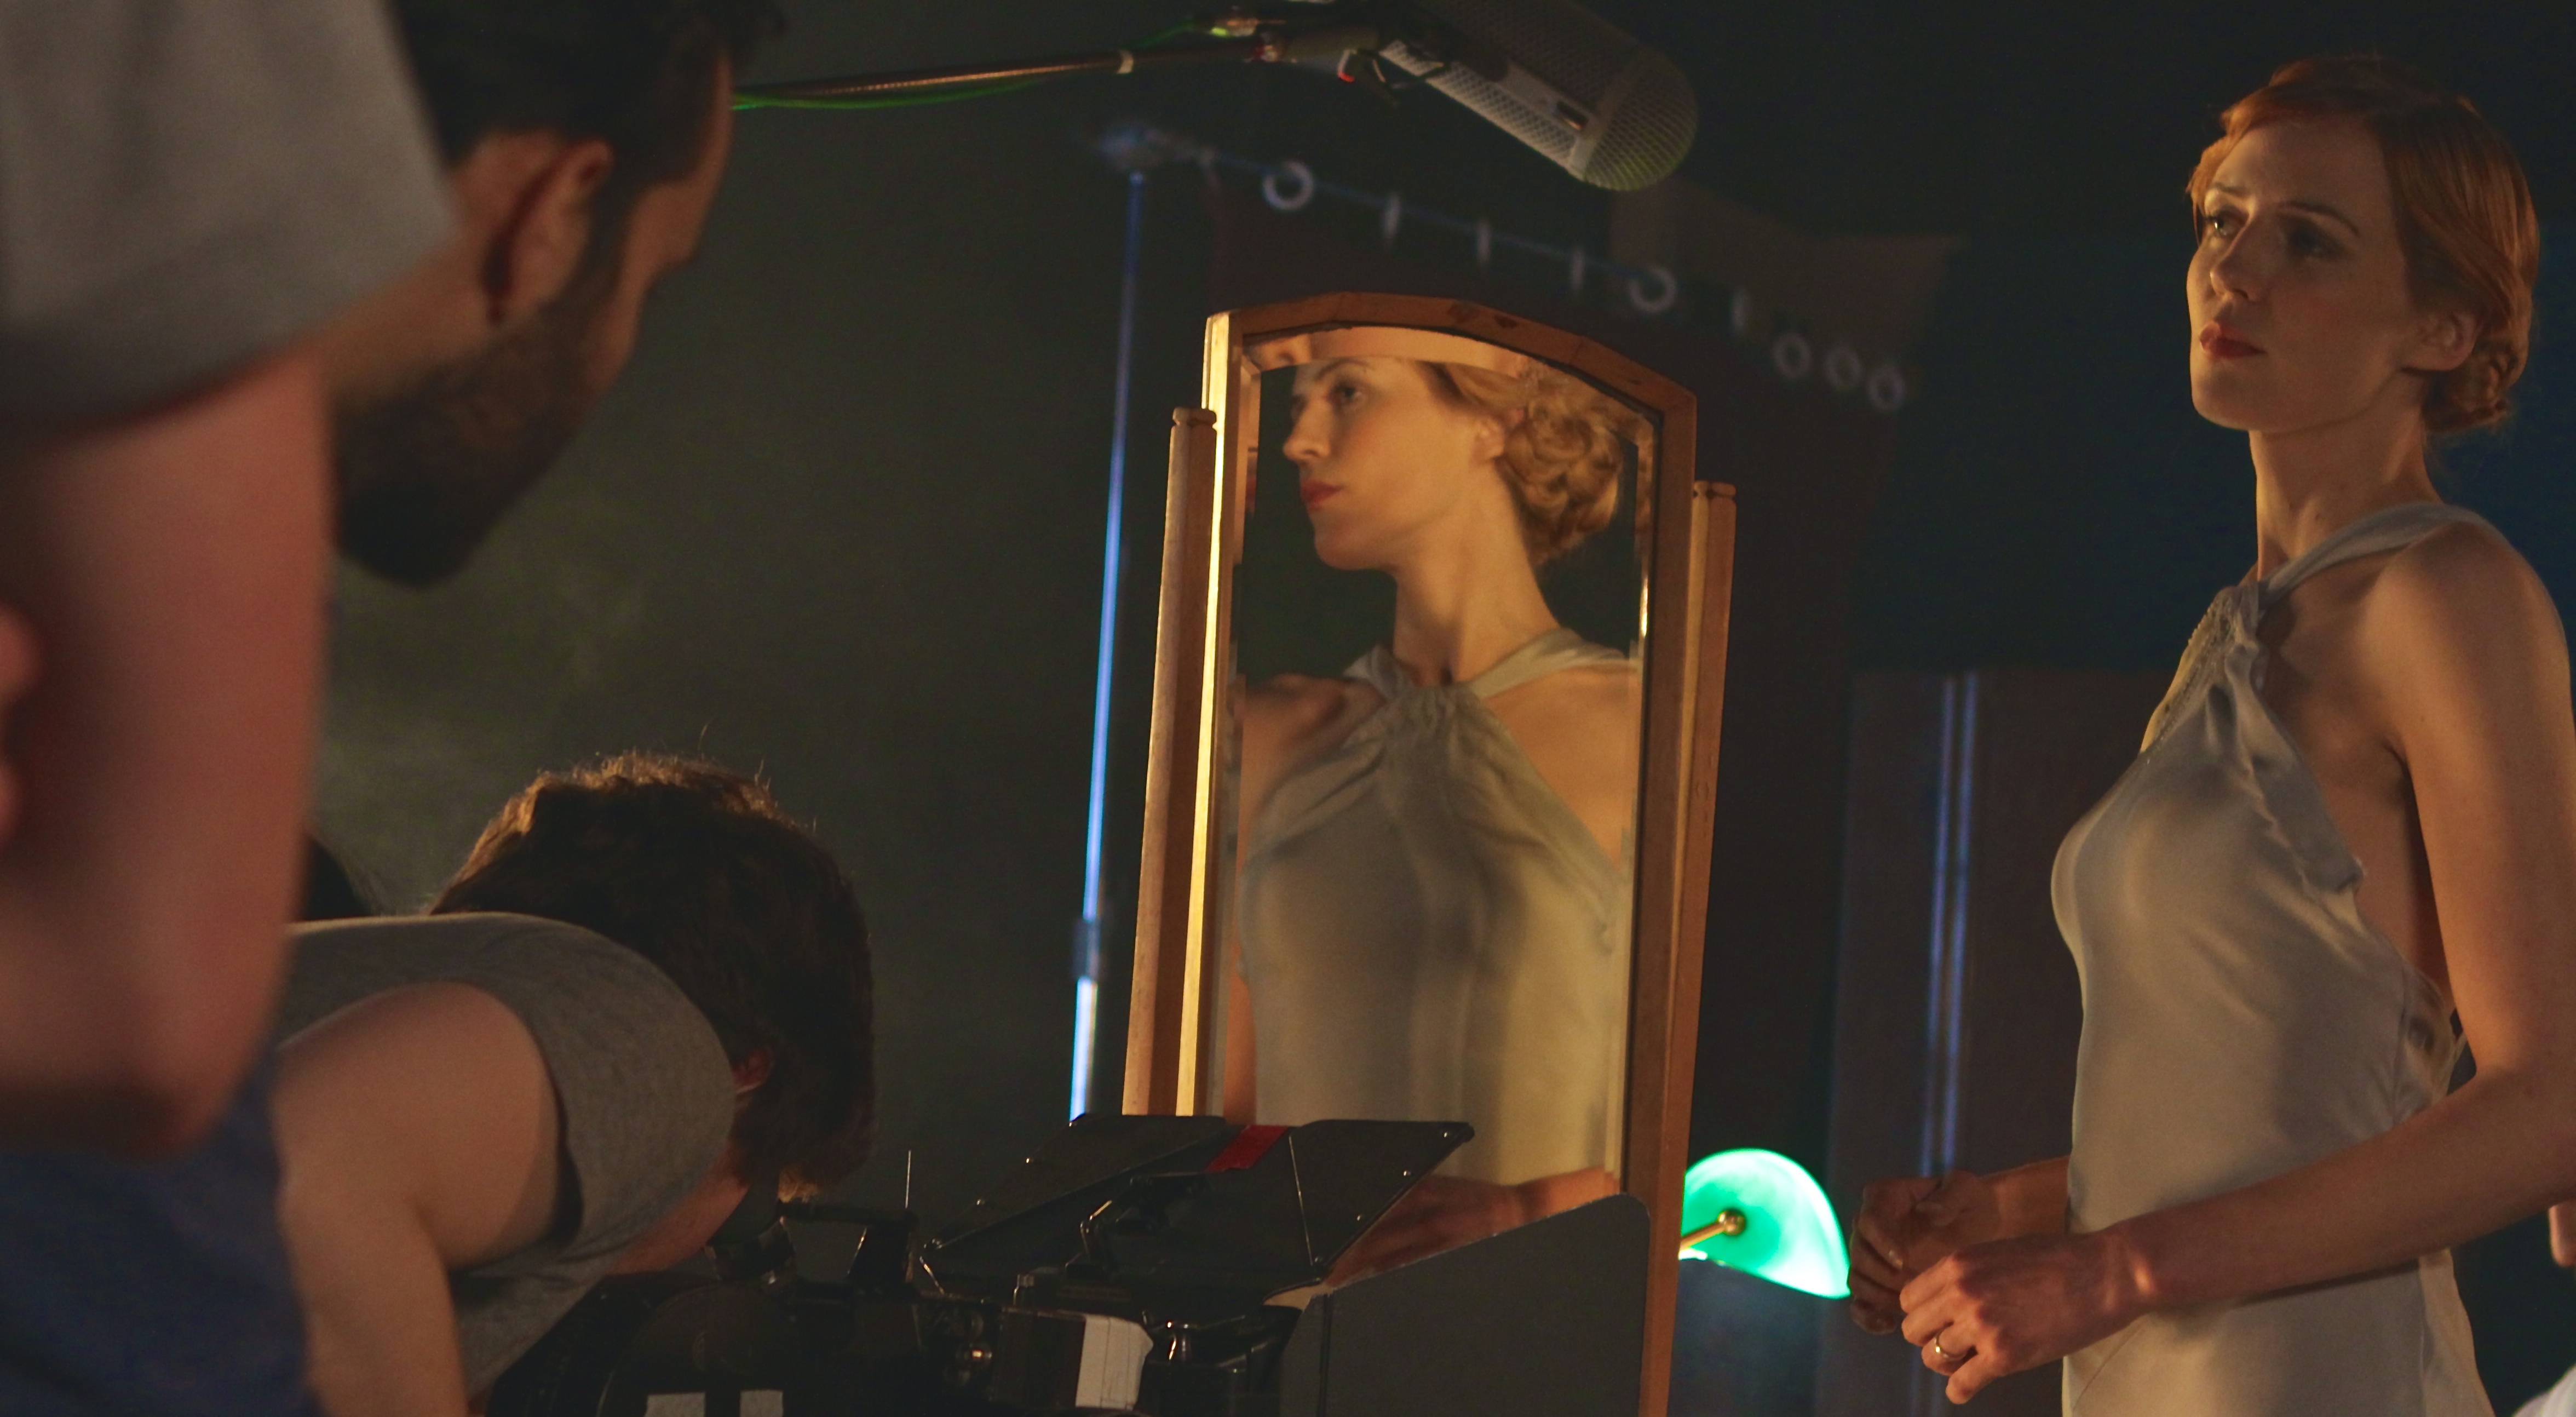 Behind the scenes of The Tailor with David Smith and Kari Kleiv